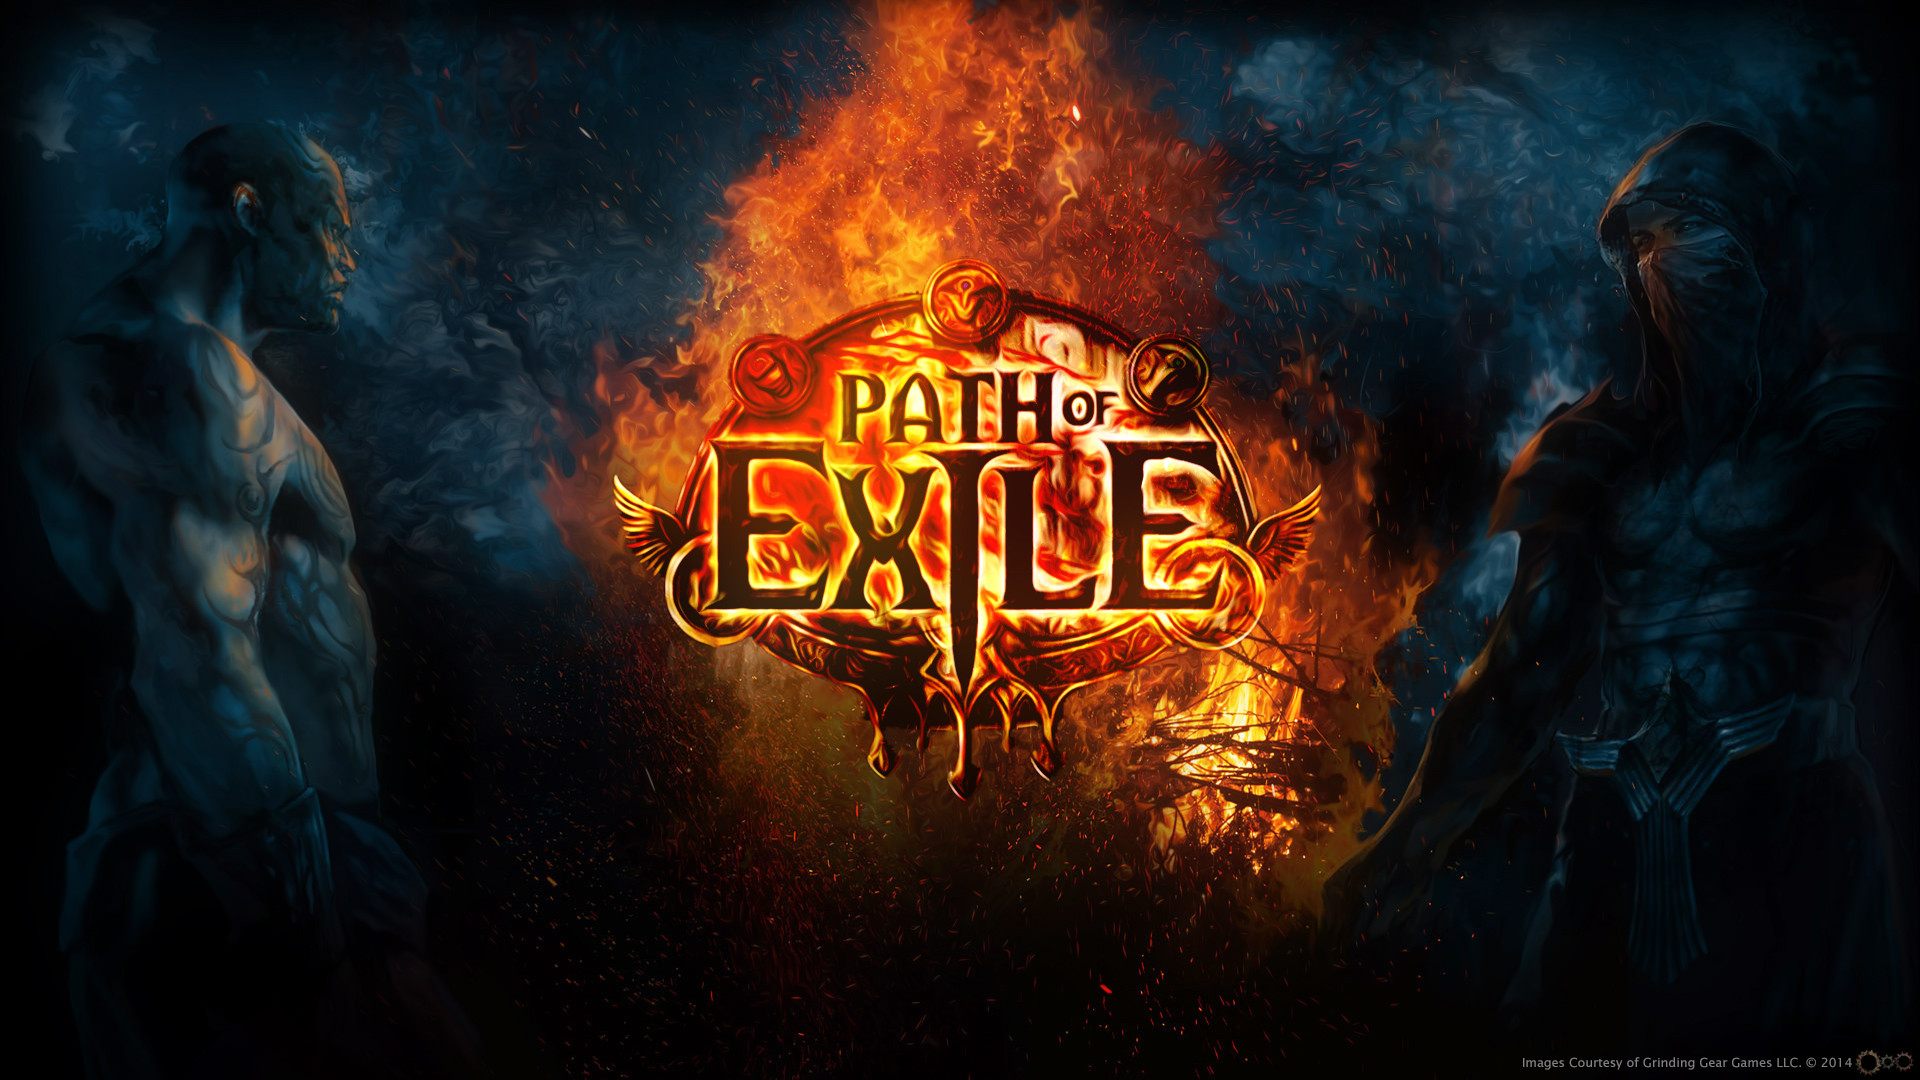 Paths exile Poe pc games Path of Exile wallpaper | 1920x1080 | 299185 |  WallpaperUP